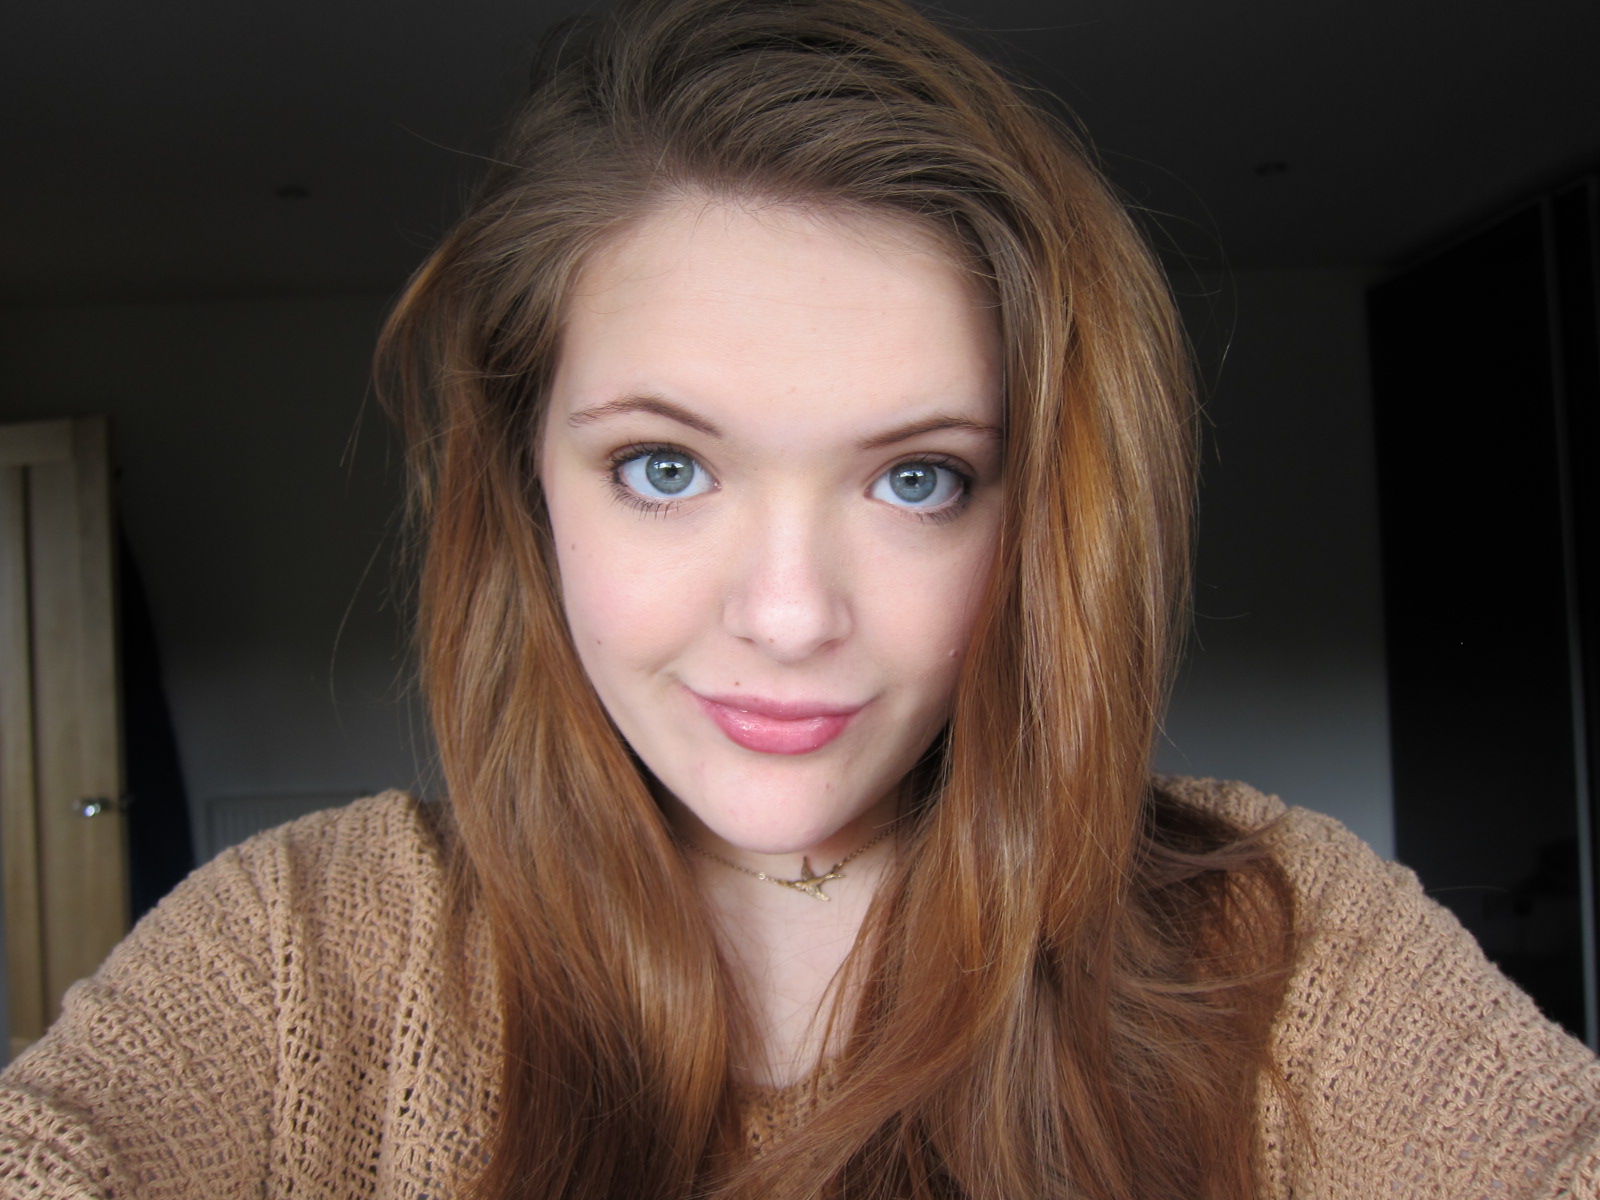 This is my hair before (it's an old piccy, but my hair colour was ...